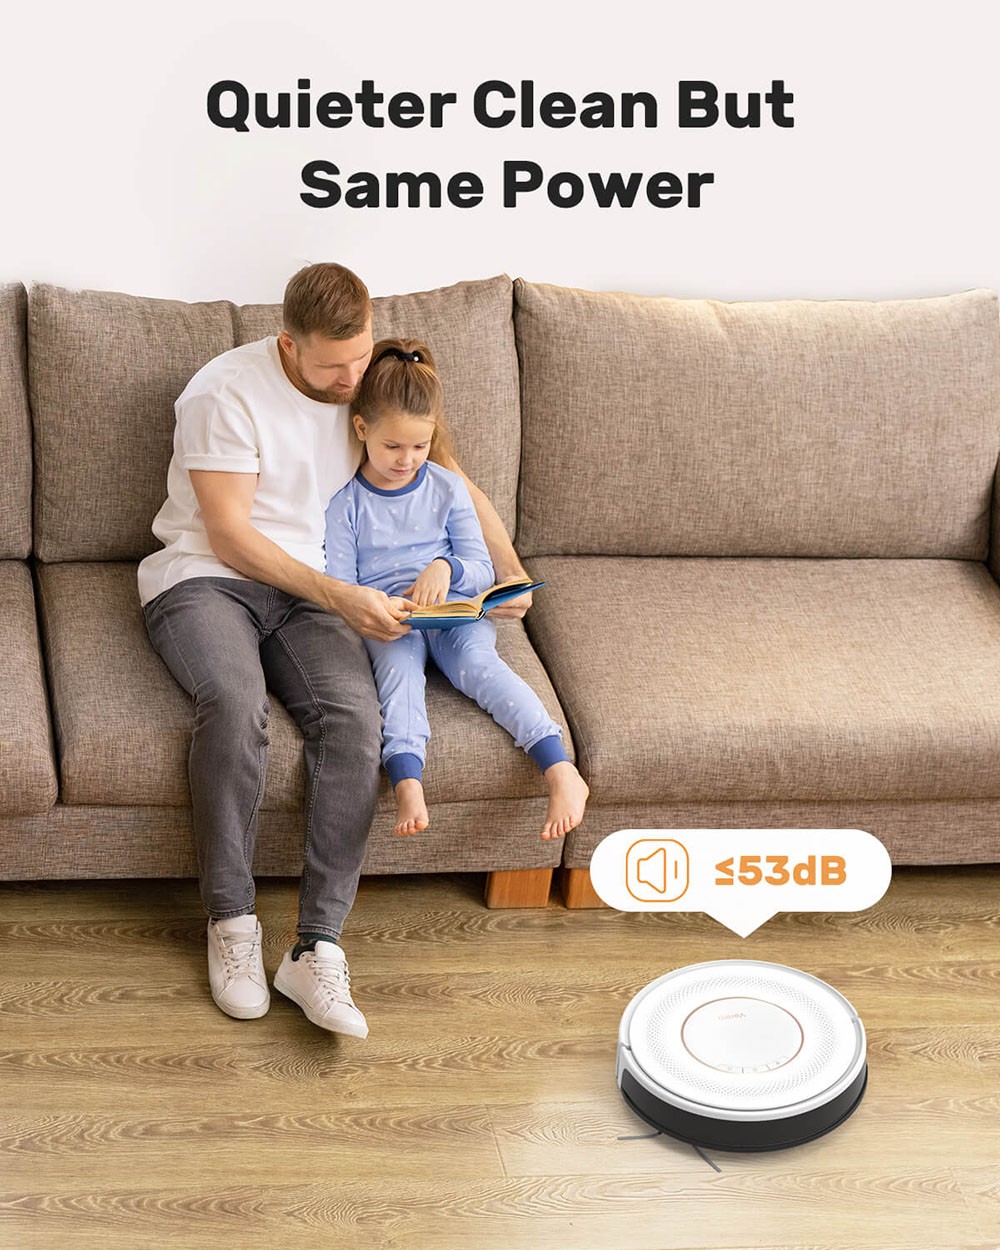 Verefa V60 Pro Robot Vacuum Cleaner, Self Emptying, 3200Pa Suction, 2L Dust Bag, Quiet Cleaning, Smart Navigation 2.0, 150Mins Max Runtime, APP/Remote Control - White